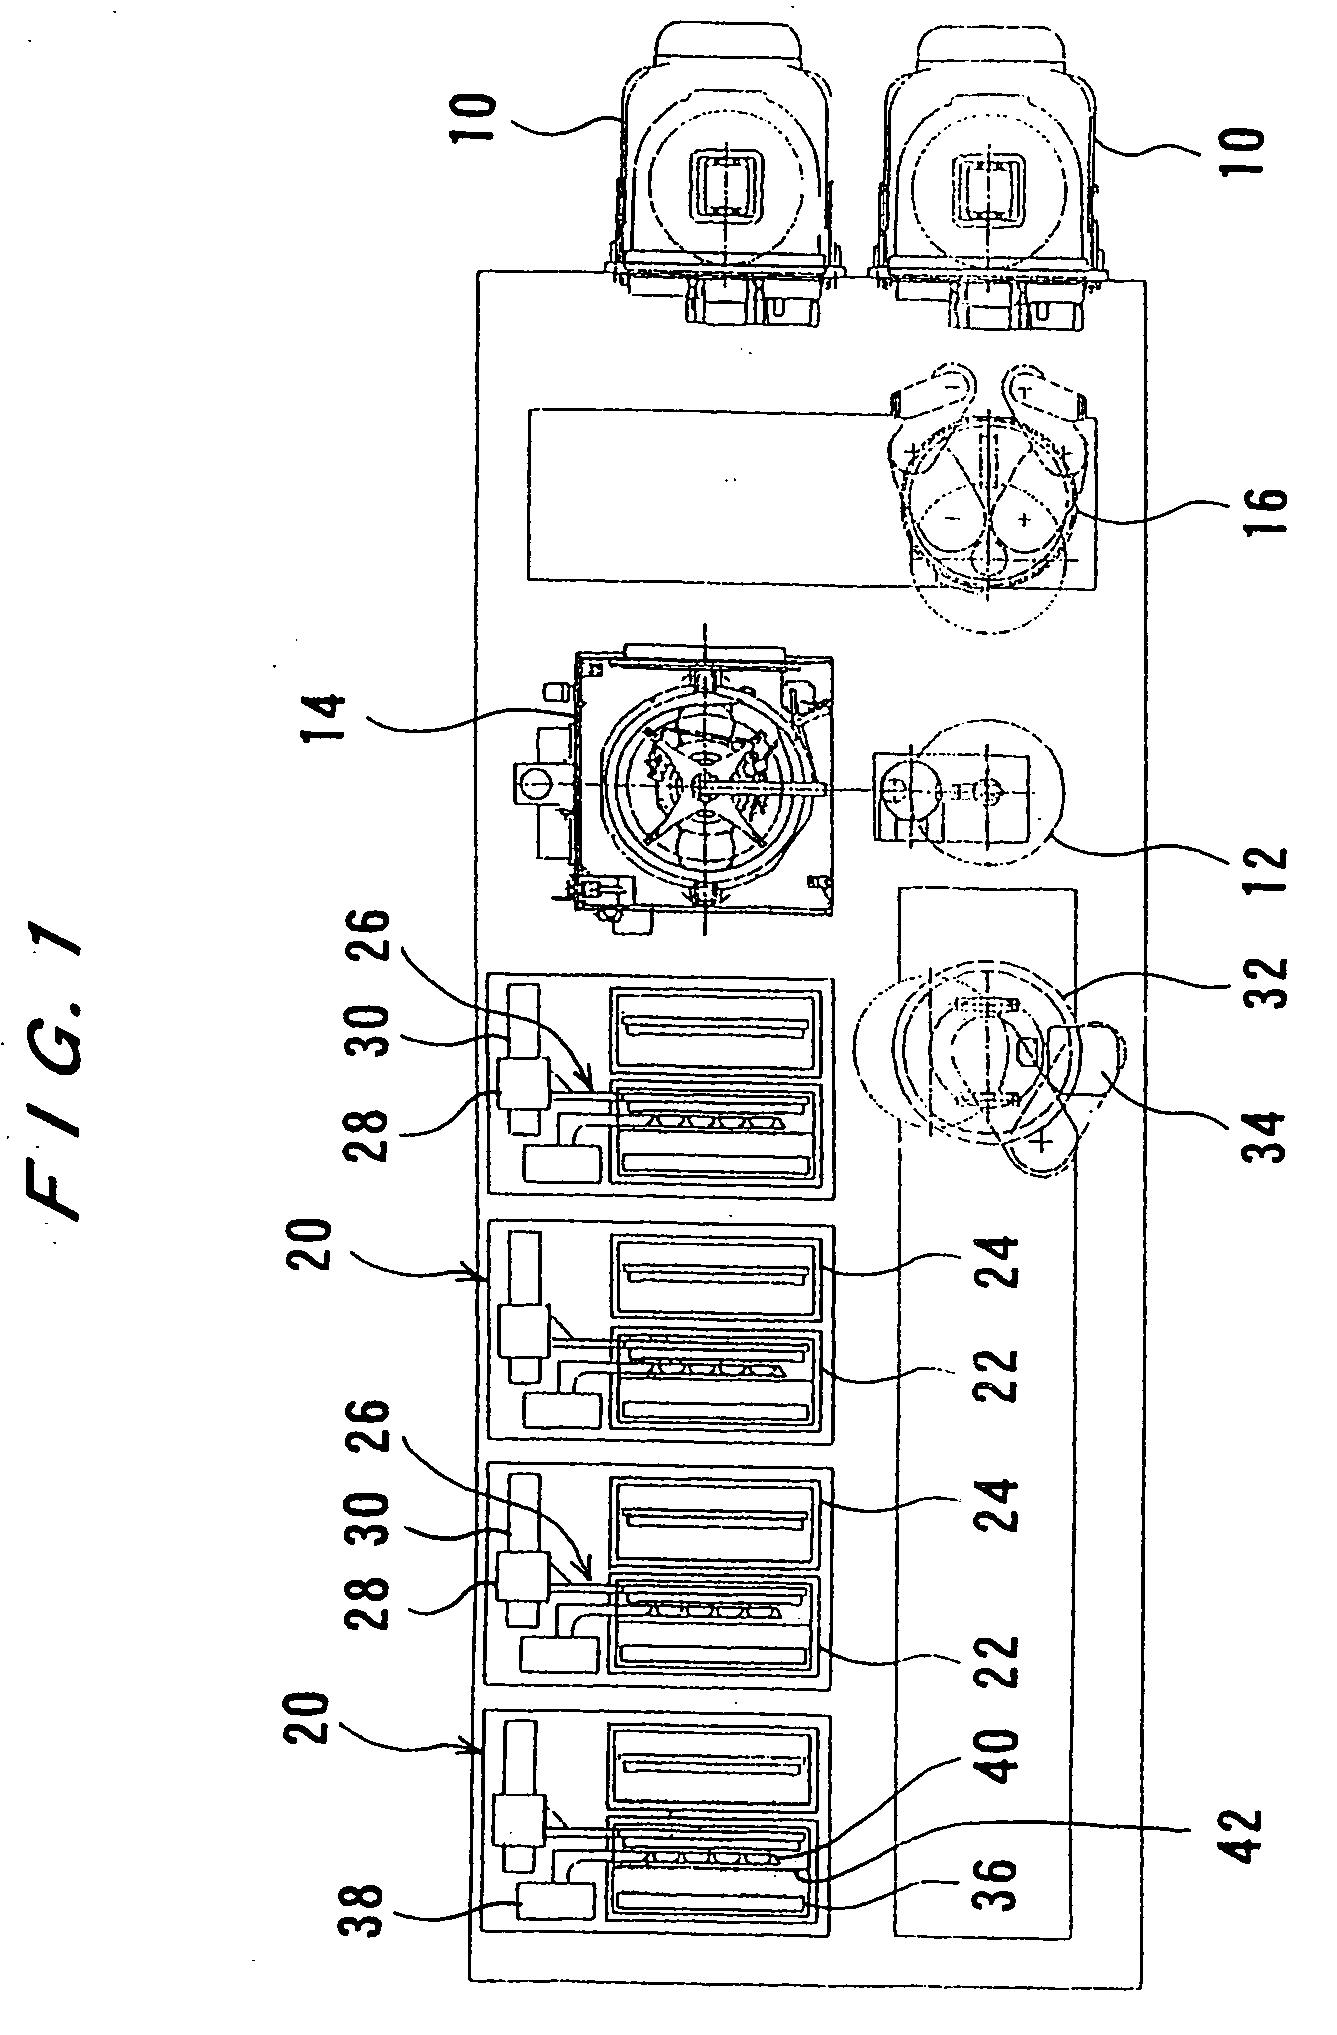 Substrate holder, plating apparatus, and plating method